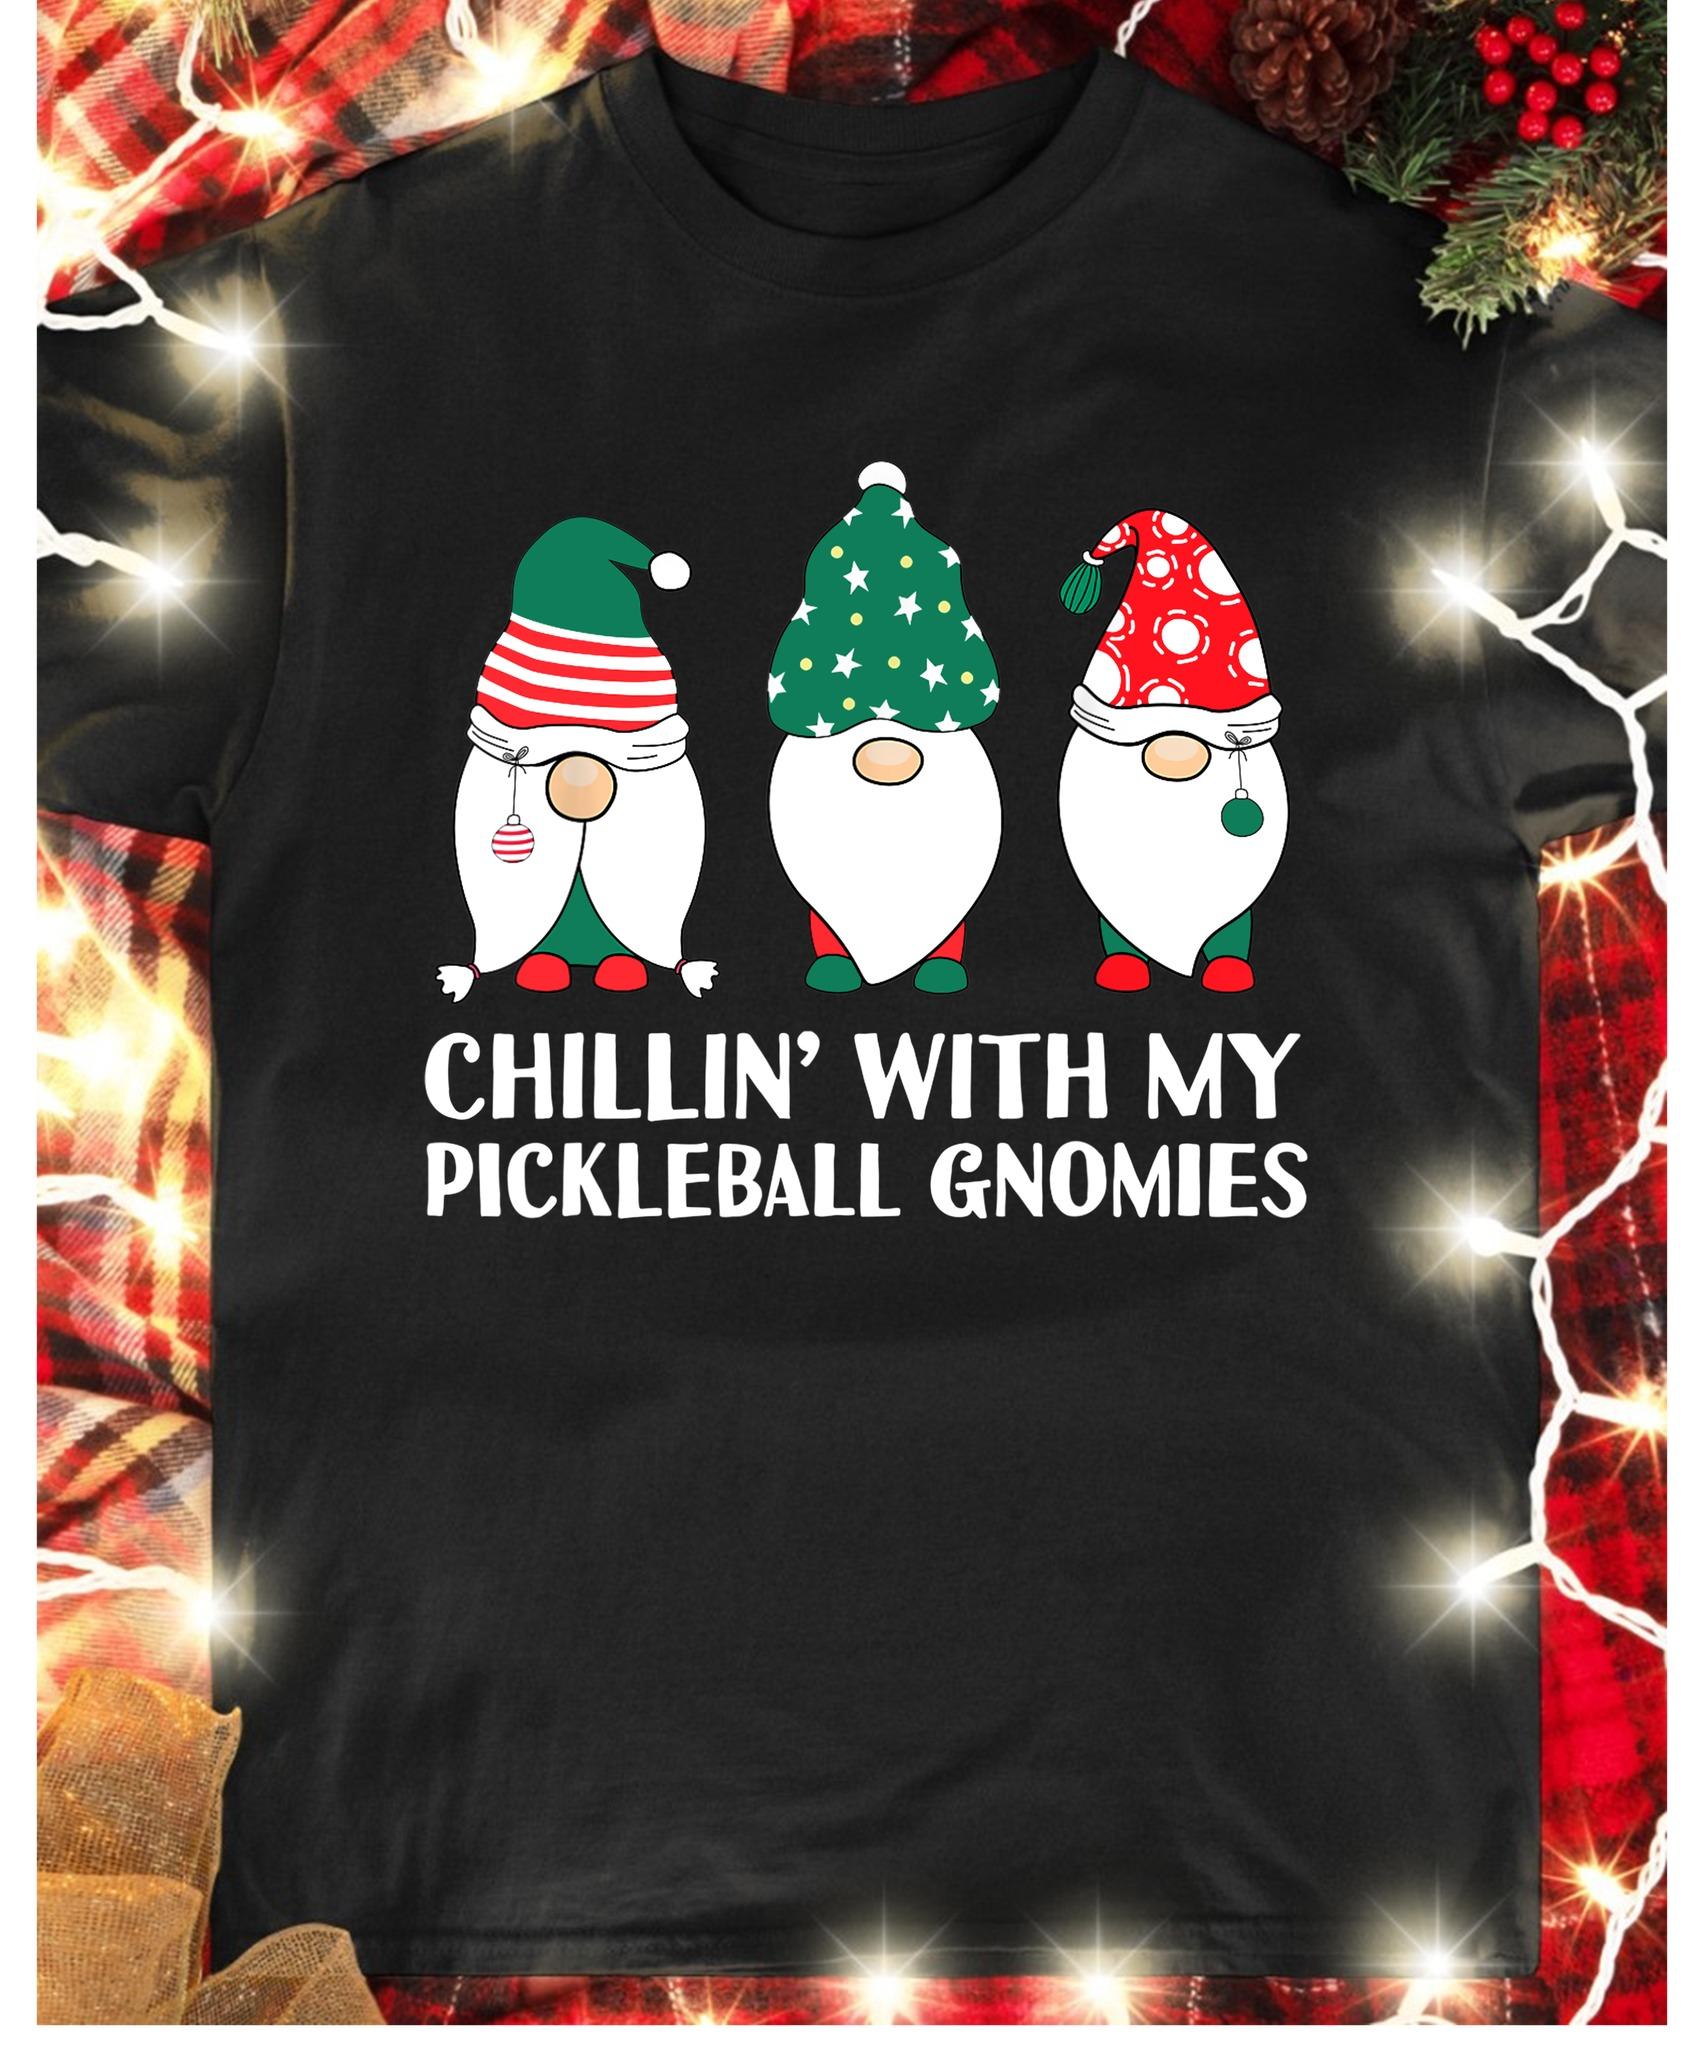 Chillin' with my pickleball gnomies - Garden gnomies, Pickleball player's gift